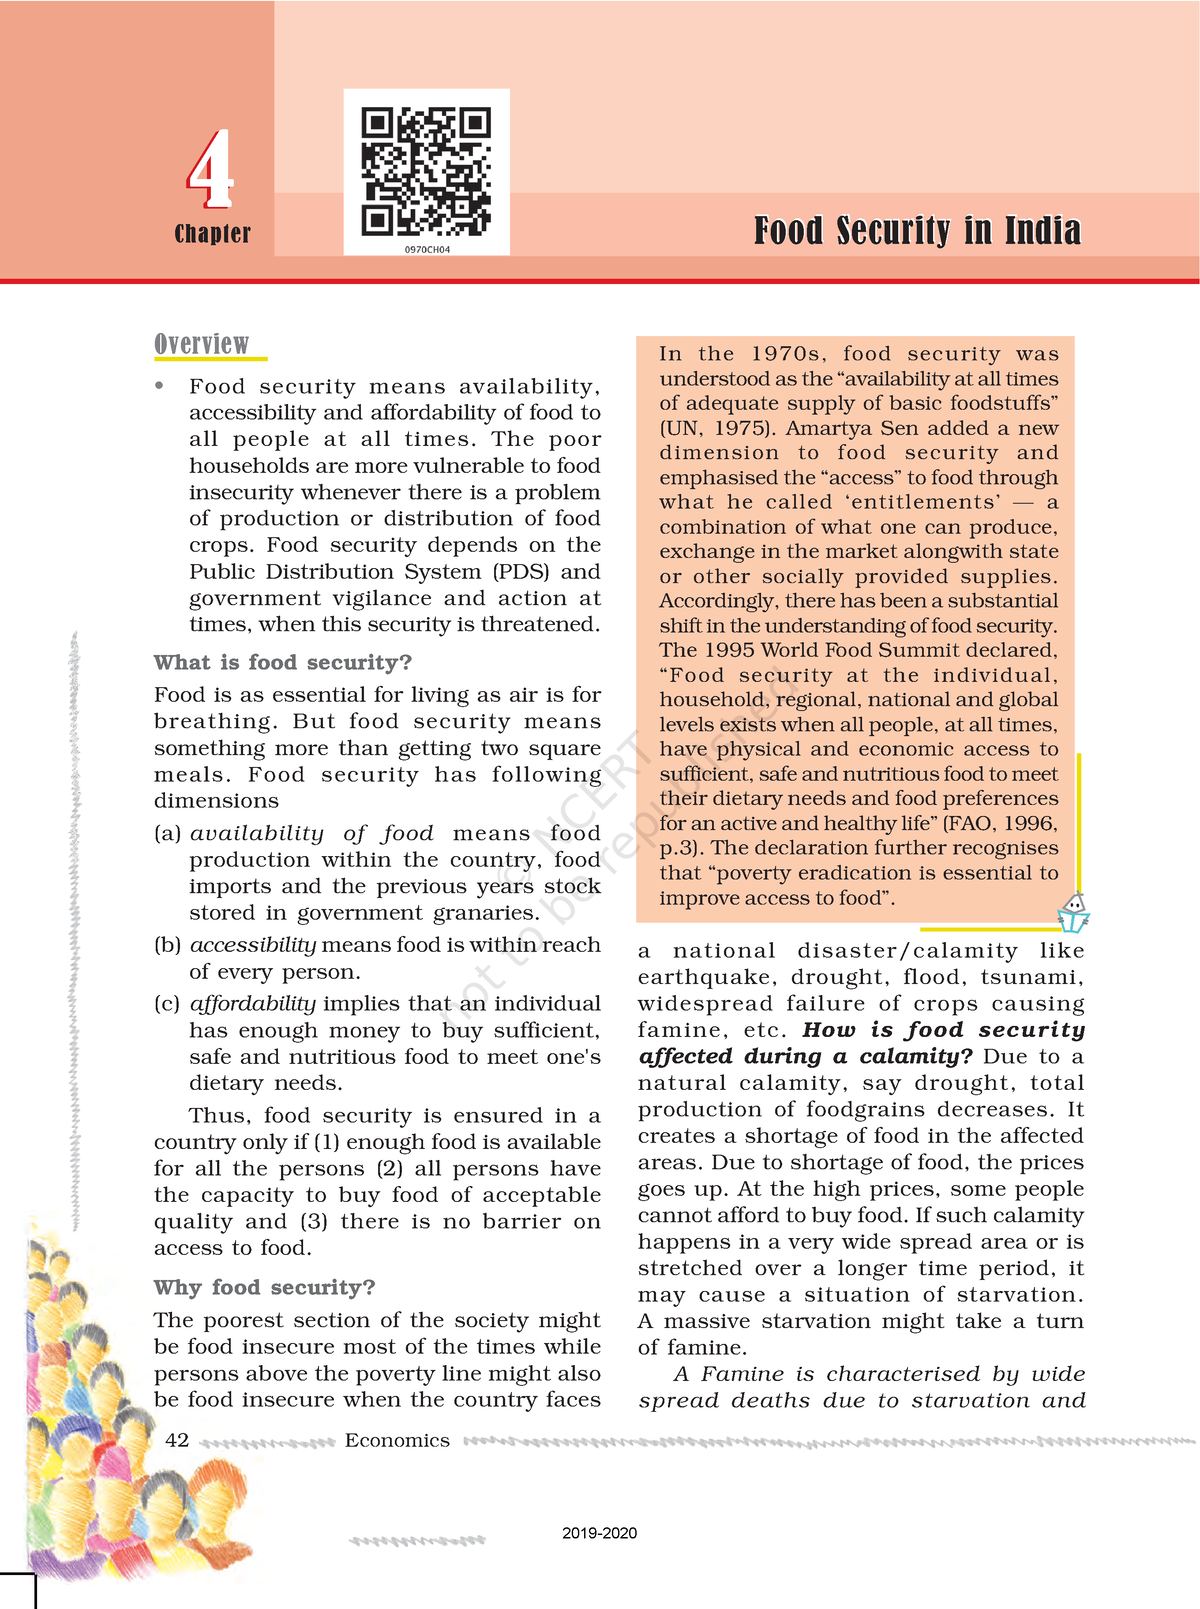 Class 9 Food Security in India Notes - Leverage Edu